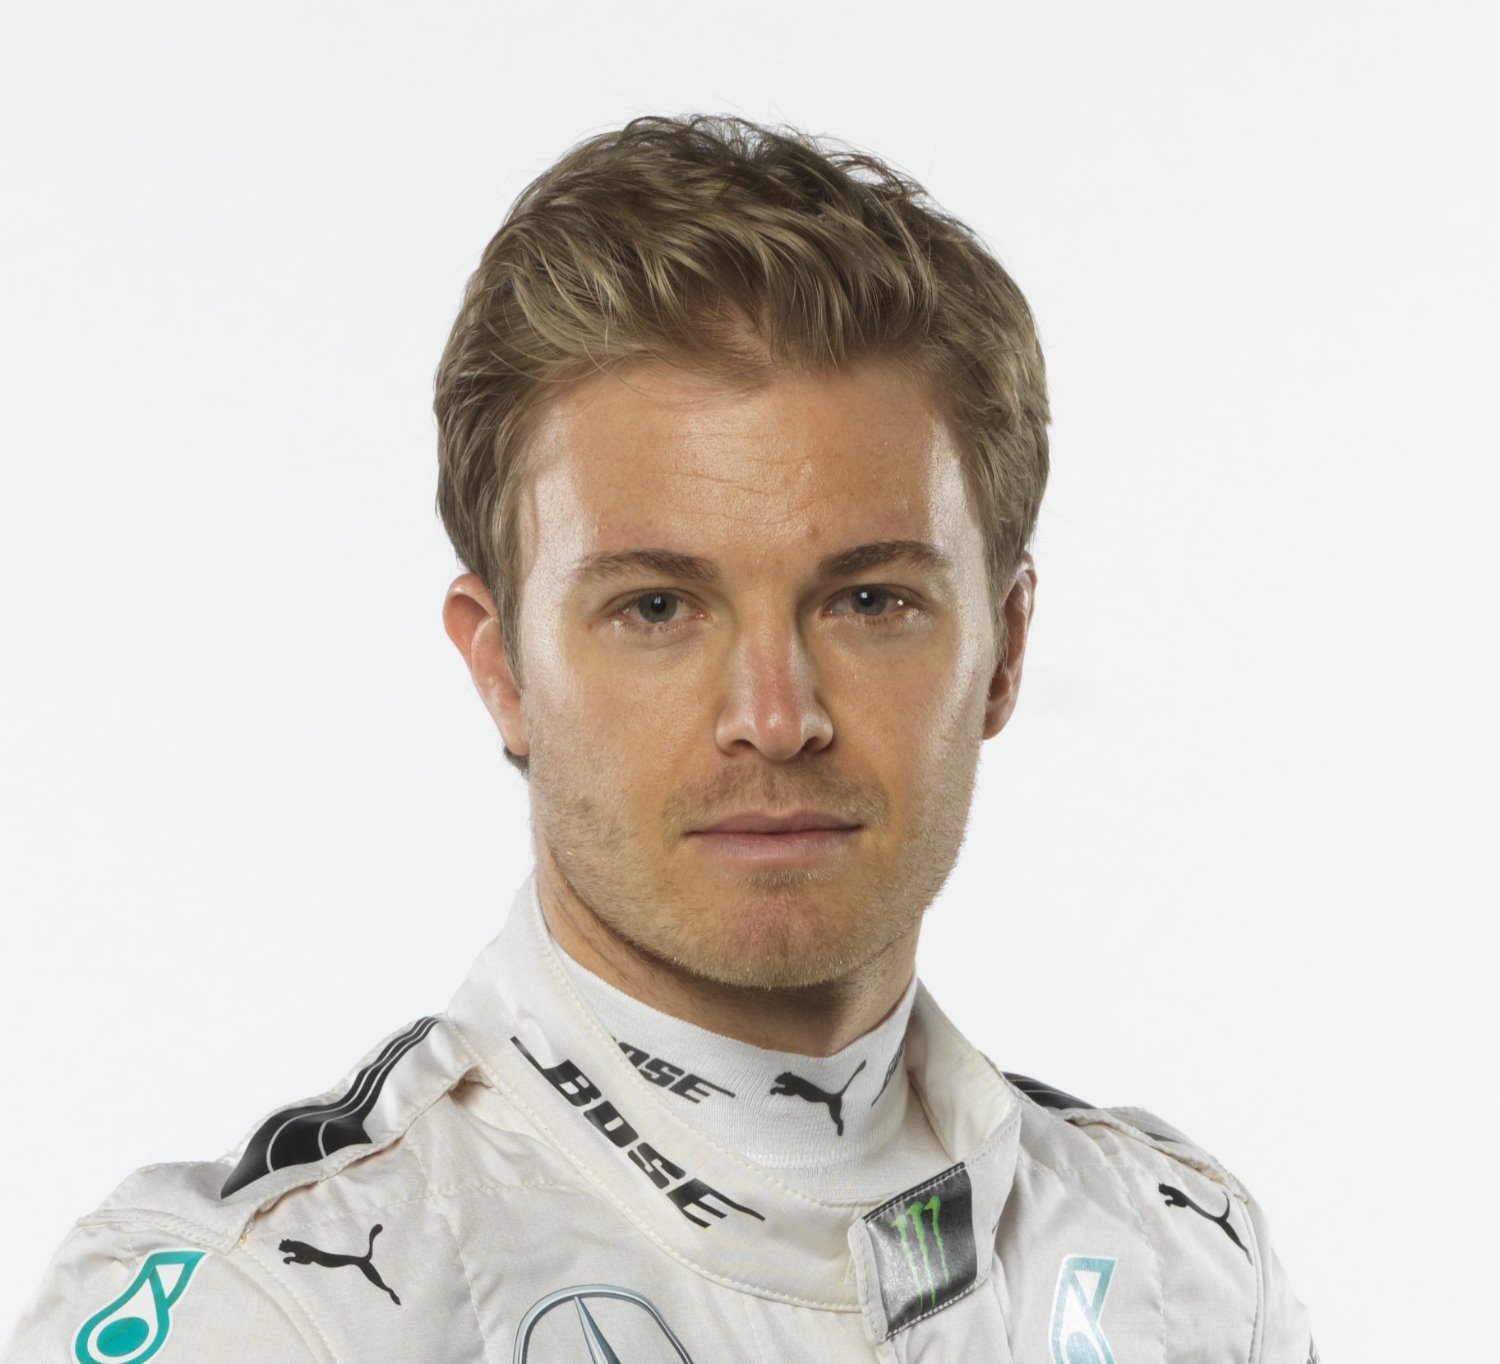 Mercedes is making Rosberg the 2016 F1 champion, then they will re-sign him